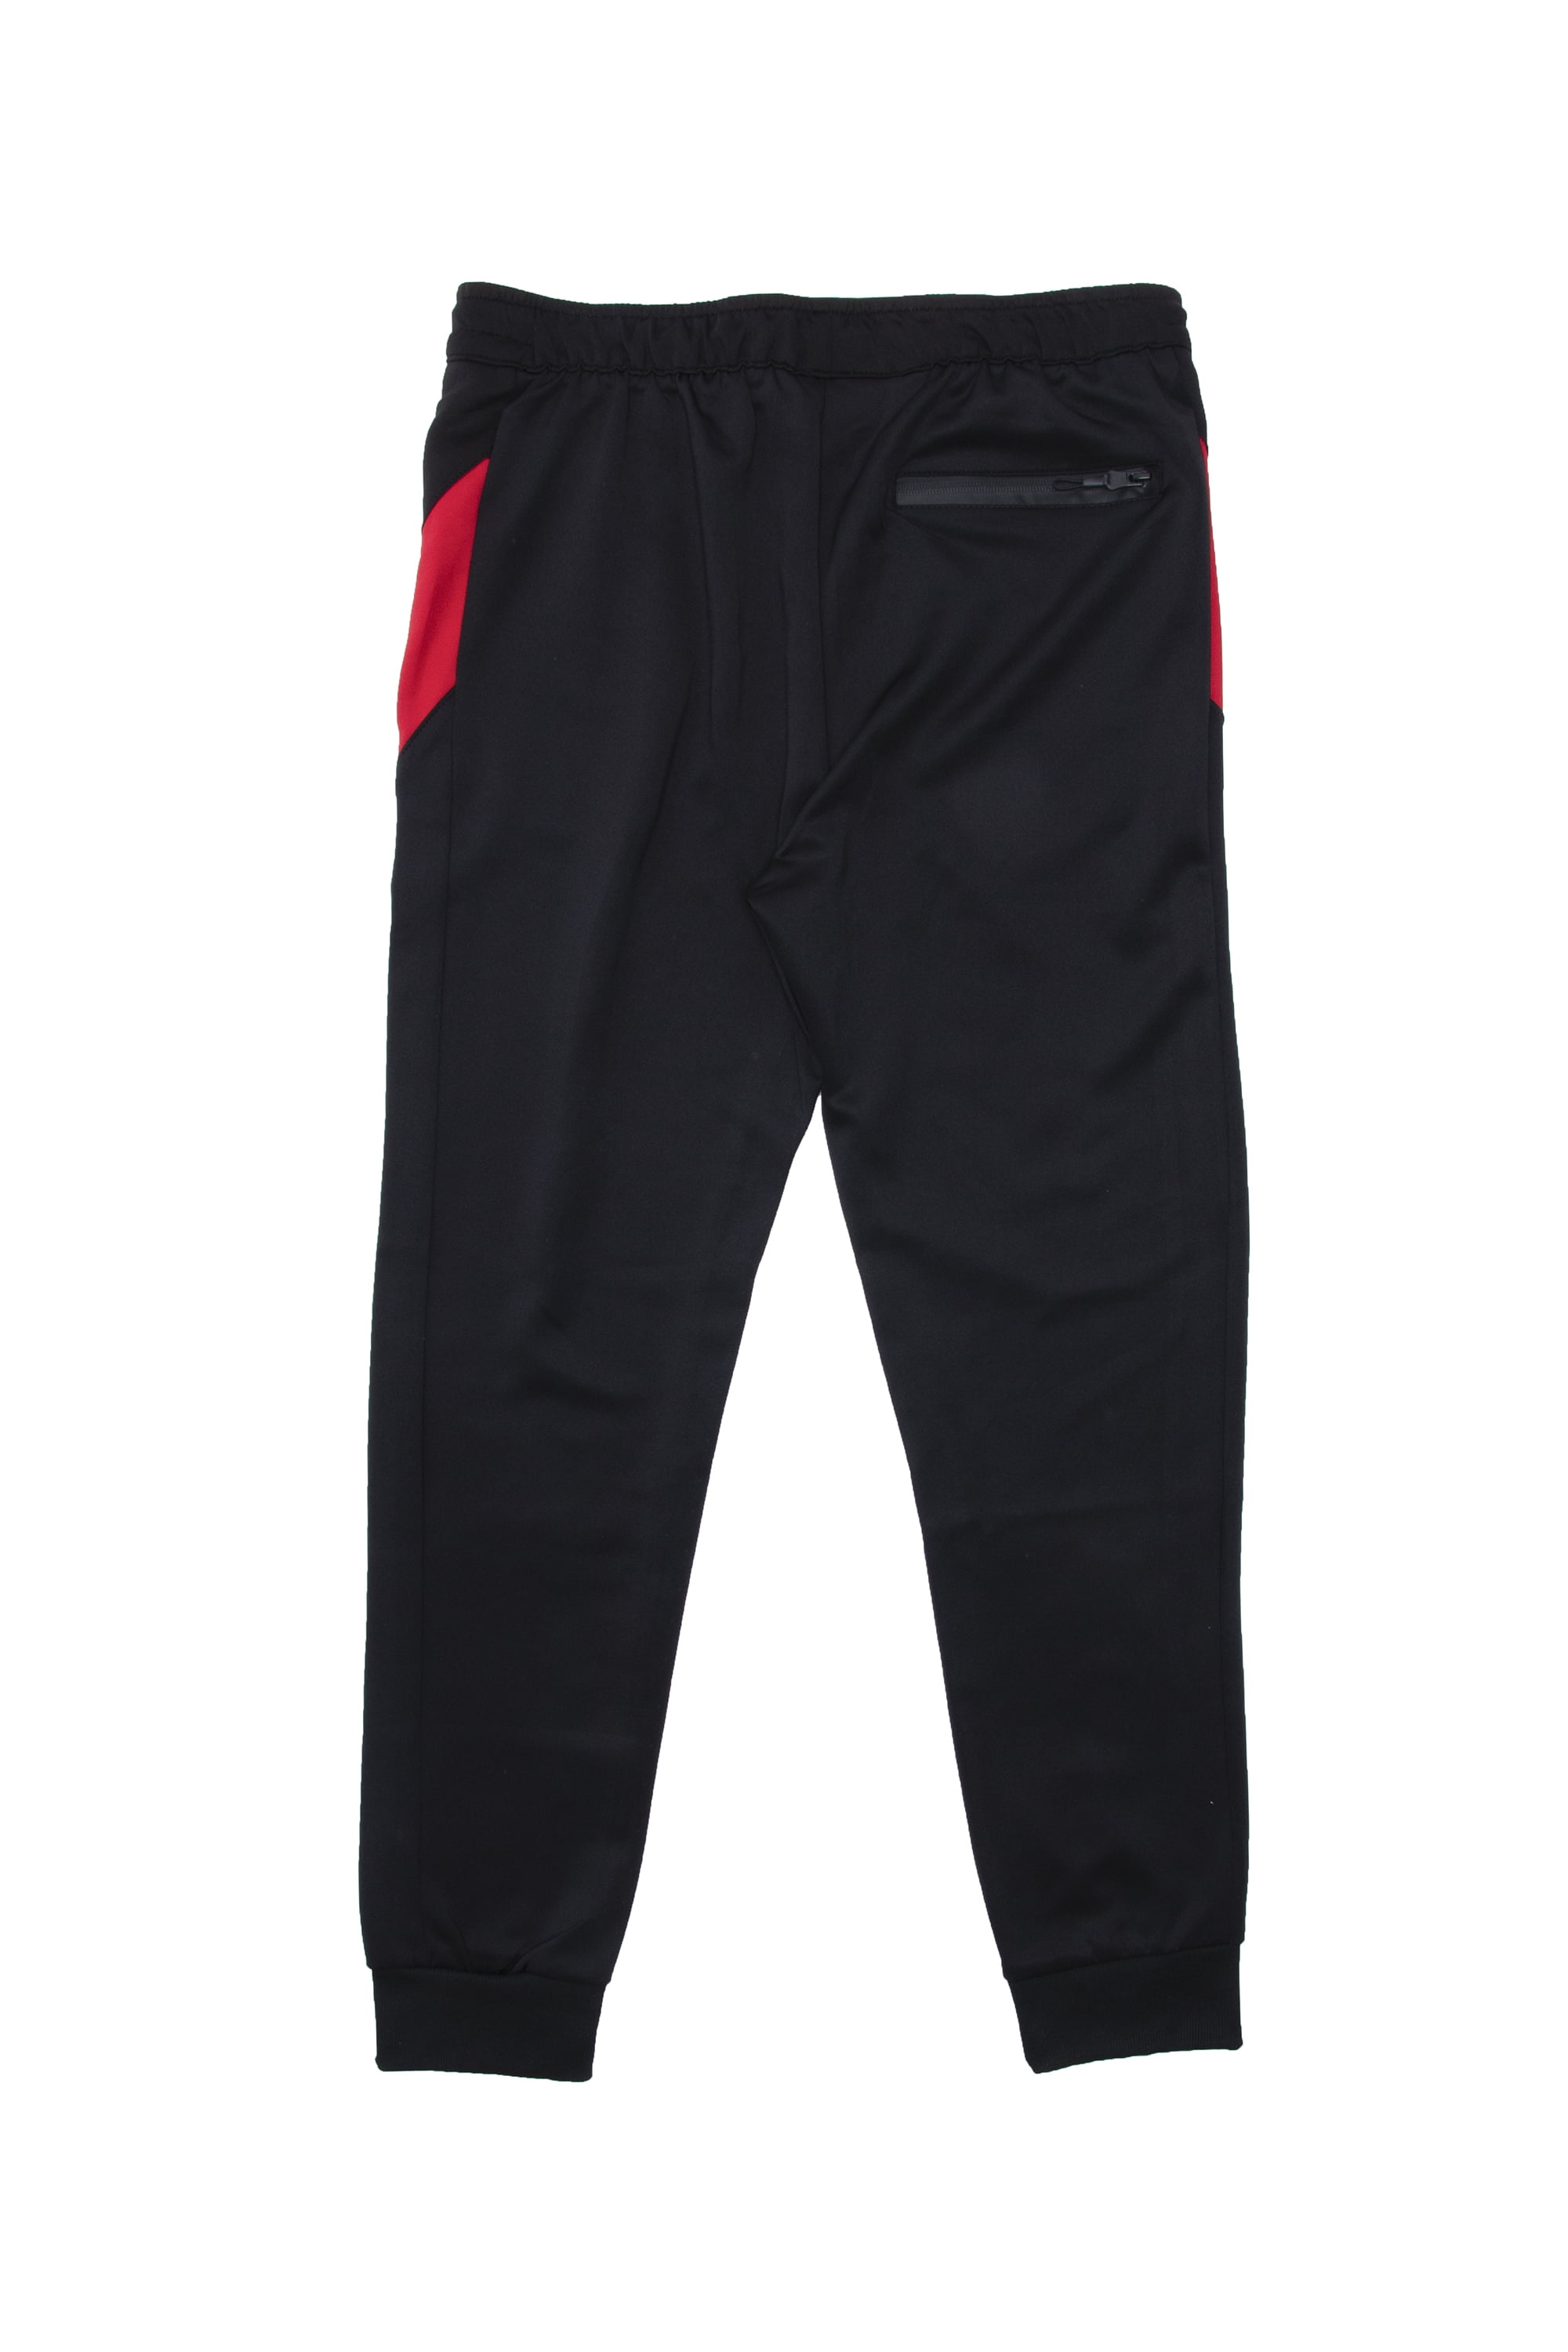 CULTURA SPORT Men's Active Fashion Fleece Jogger Sweatpants W/ Pockets,  Athletic Pants for Gym & Running, Black/Red, Large 